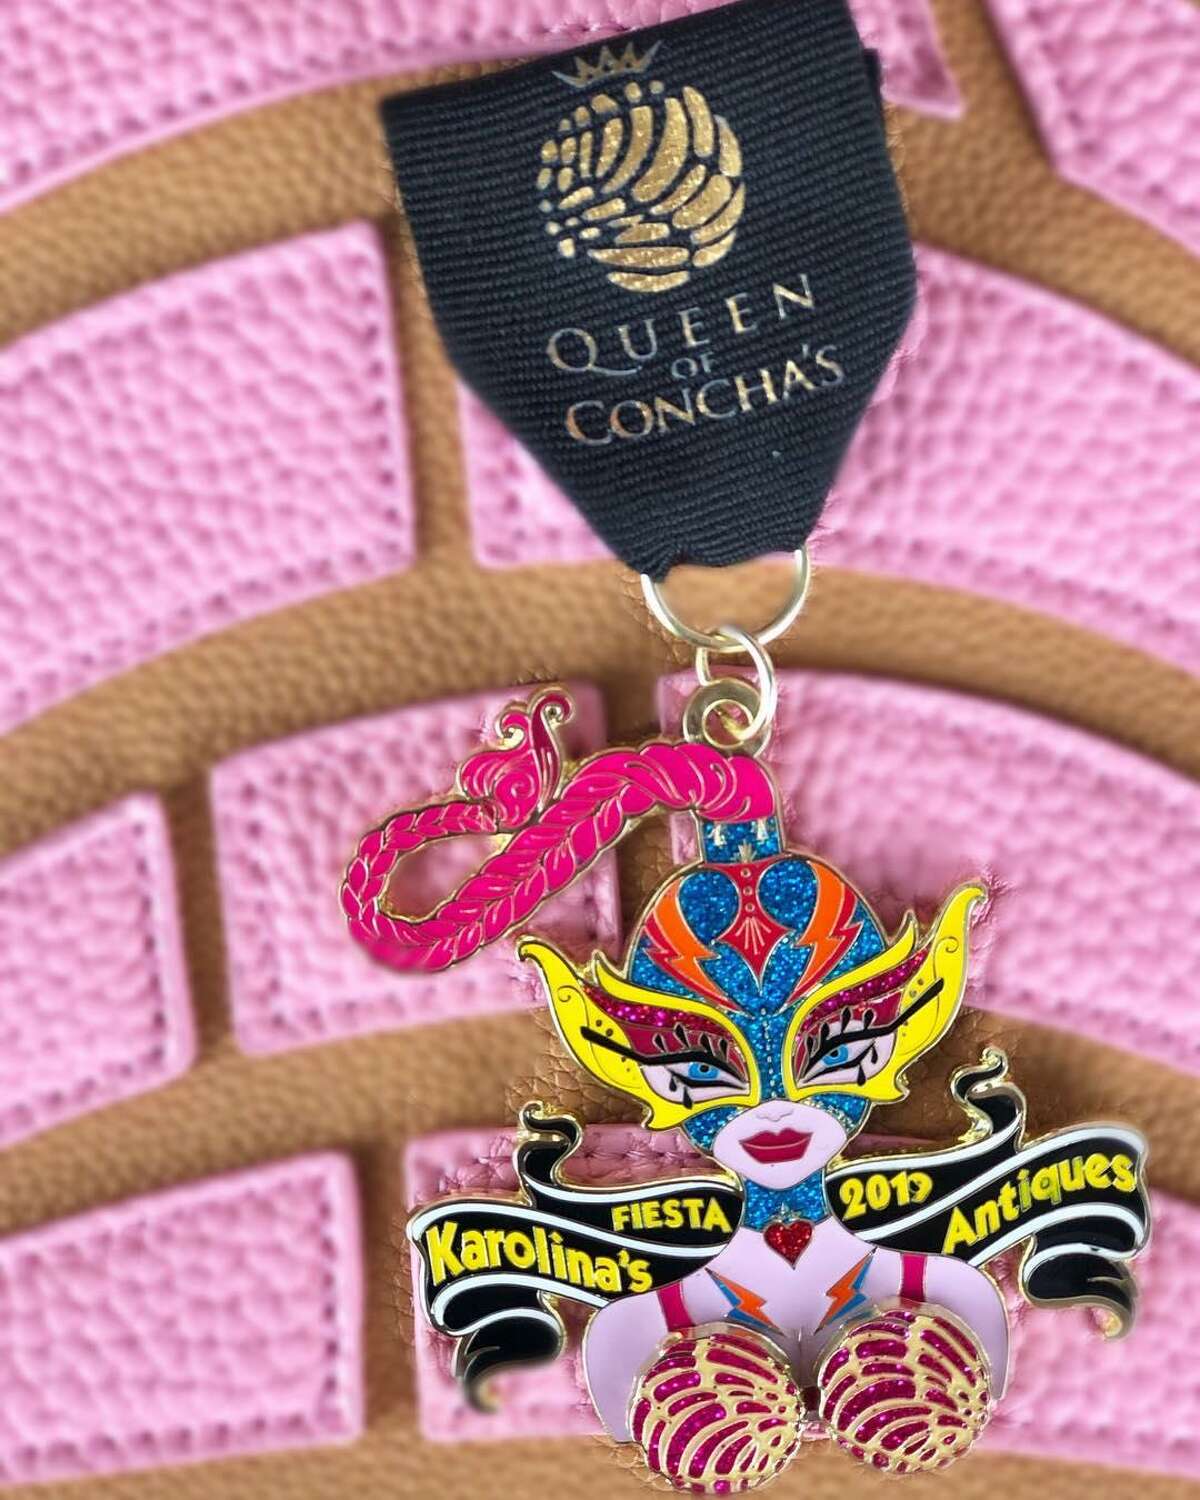 Karolina’s Antiques, 1705 Blanco Road, 210-731-9787, karolinasantiques.com Queen of Conchas Fiesta medal ($12): For Karolina’s 2019 Fiesta medal, the store’s family transformed its lady logo into a masked luchadora with a pair of spinning sweet breads that could only be called “bustiCONCHAS.”